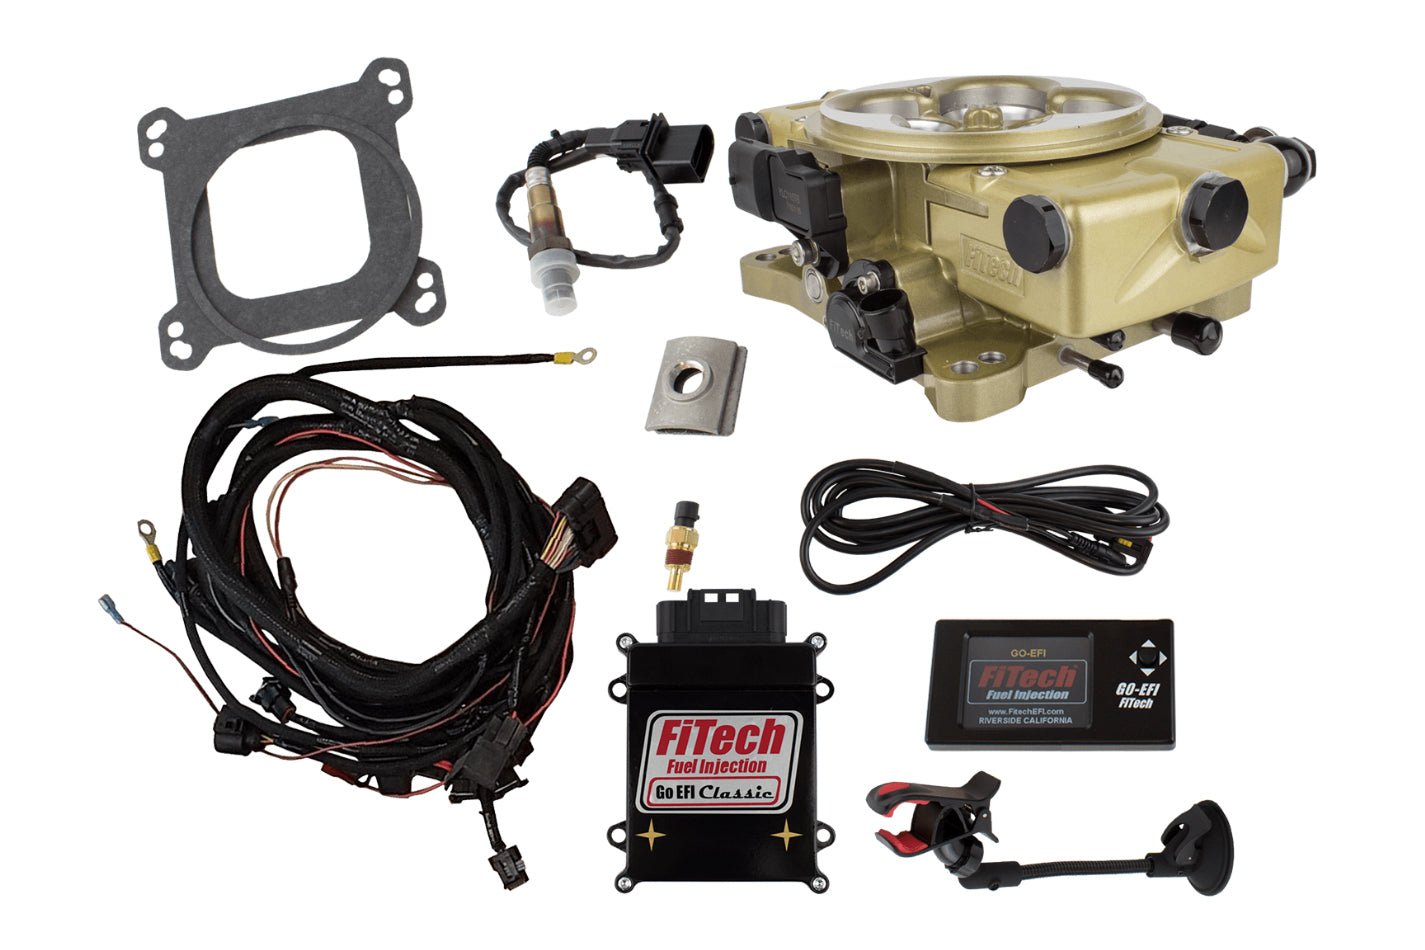 FiTech Fuel Injection Go EFI Classic 650 HP EFI w/External ECU Gold Fuel Injection Systems and Components - Electronic Electronic Fuel Injection Systems main image